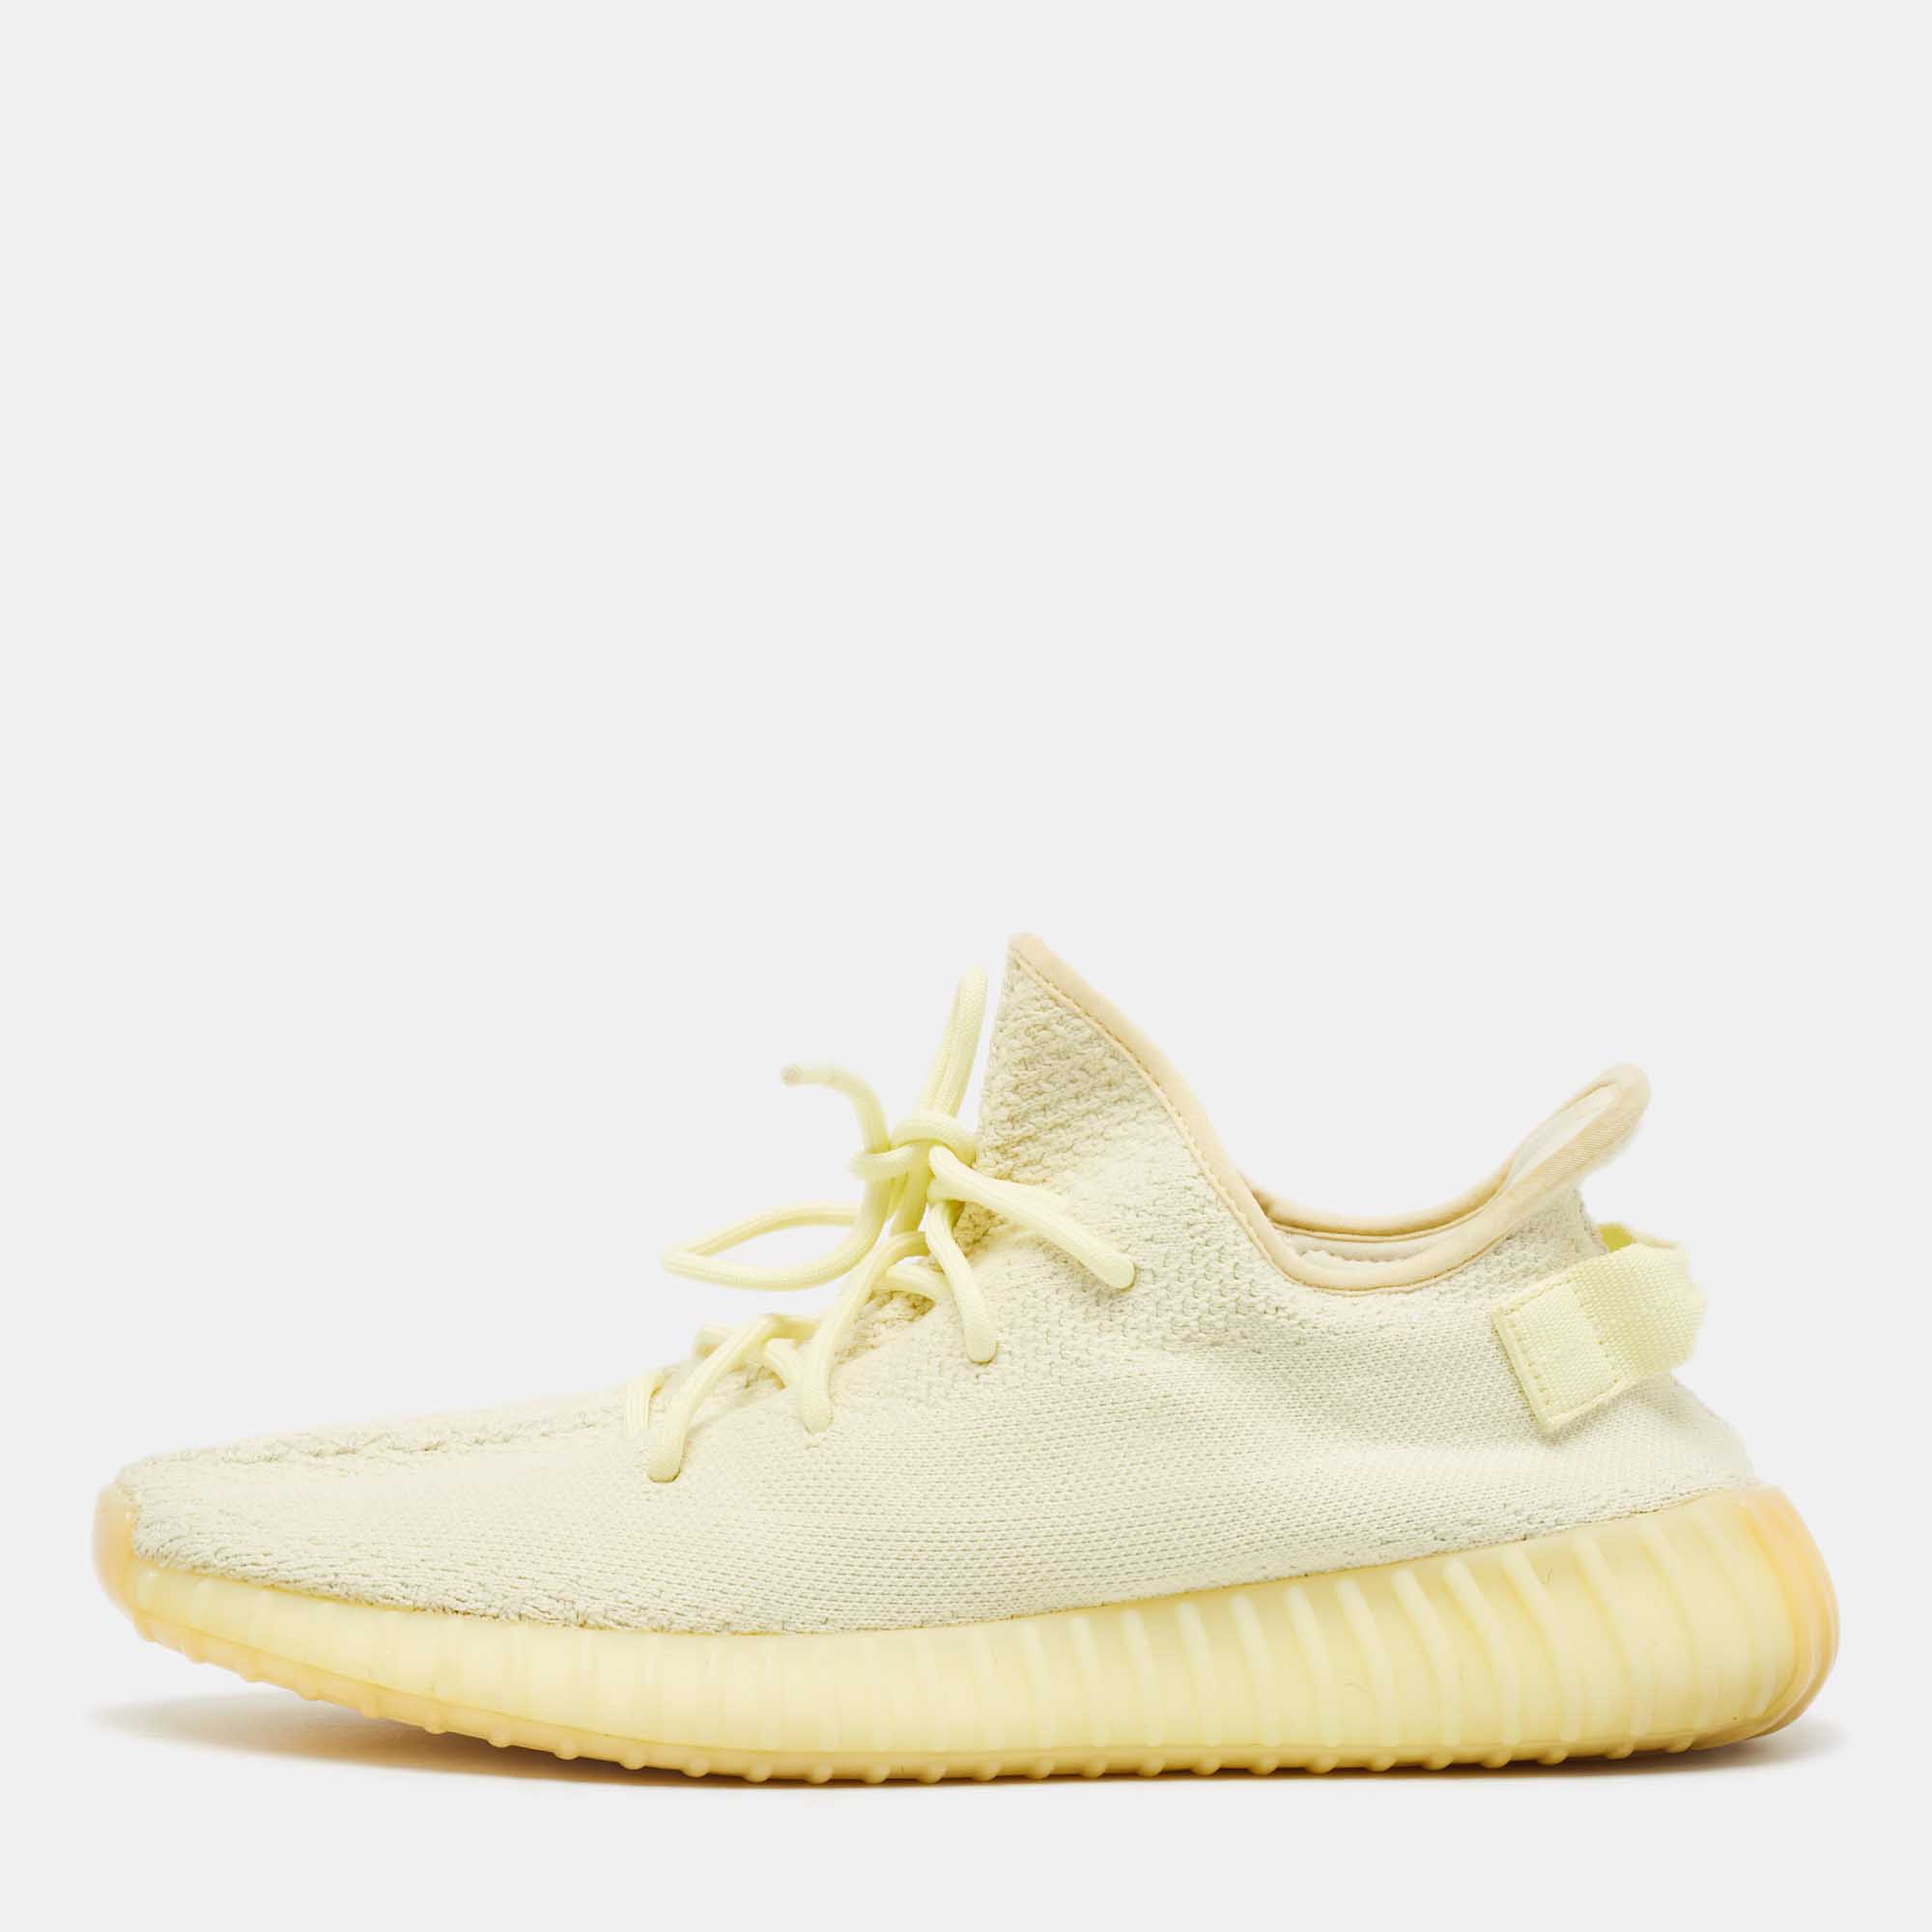 

Yeezy x Adidas Light Yellow Knit Fabric Boost 350 V2 Butter Sneakers Size 45 1/3